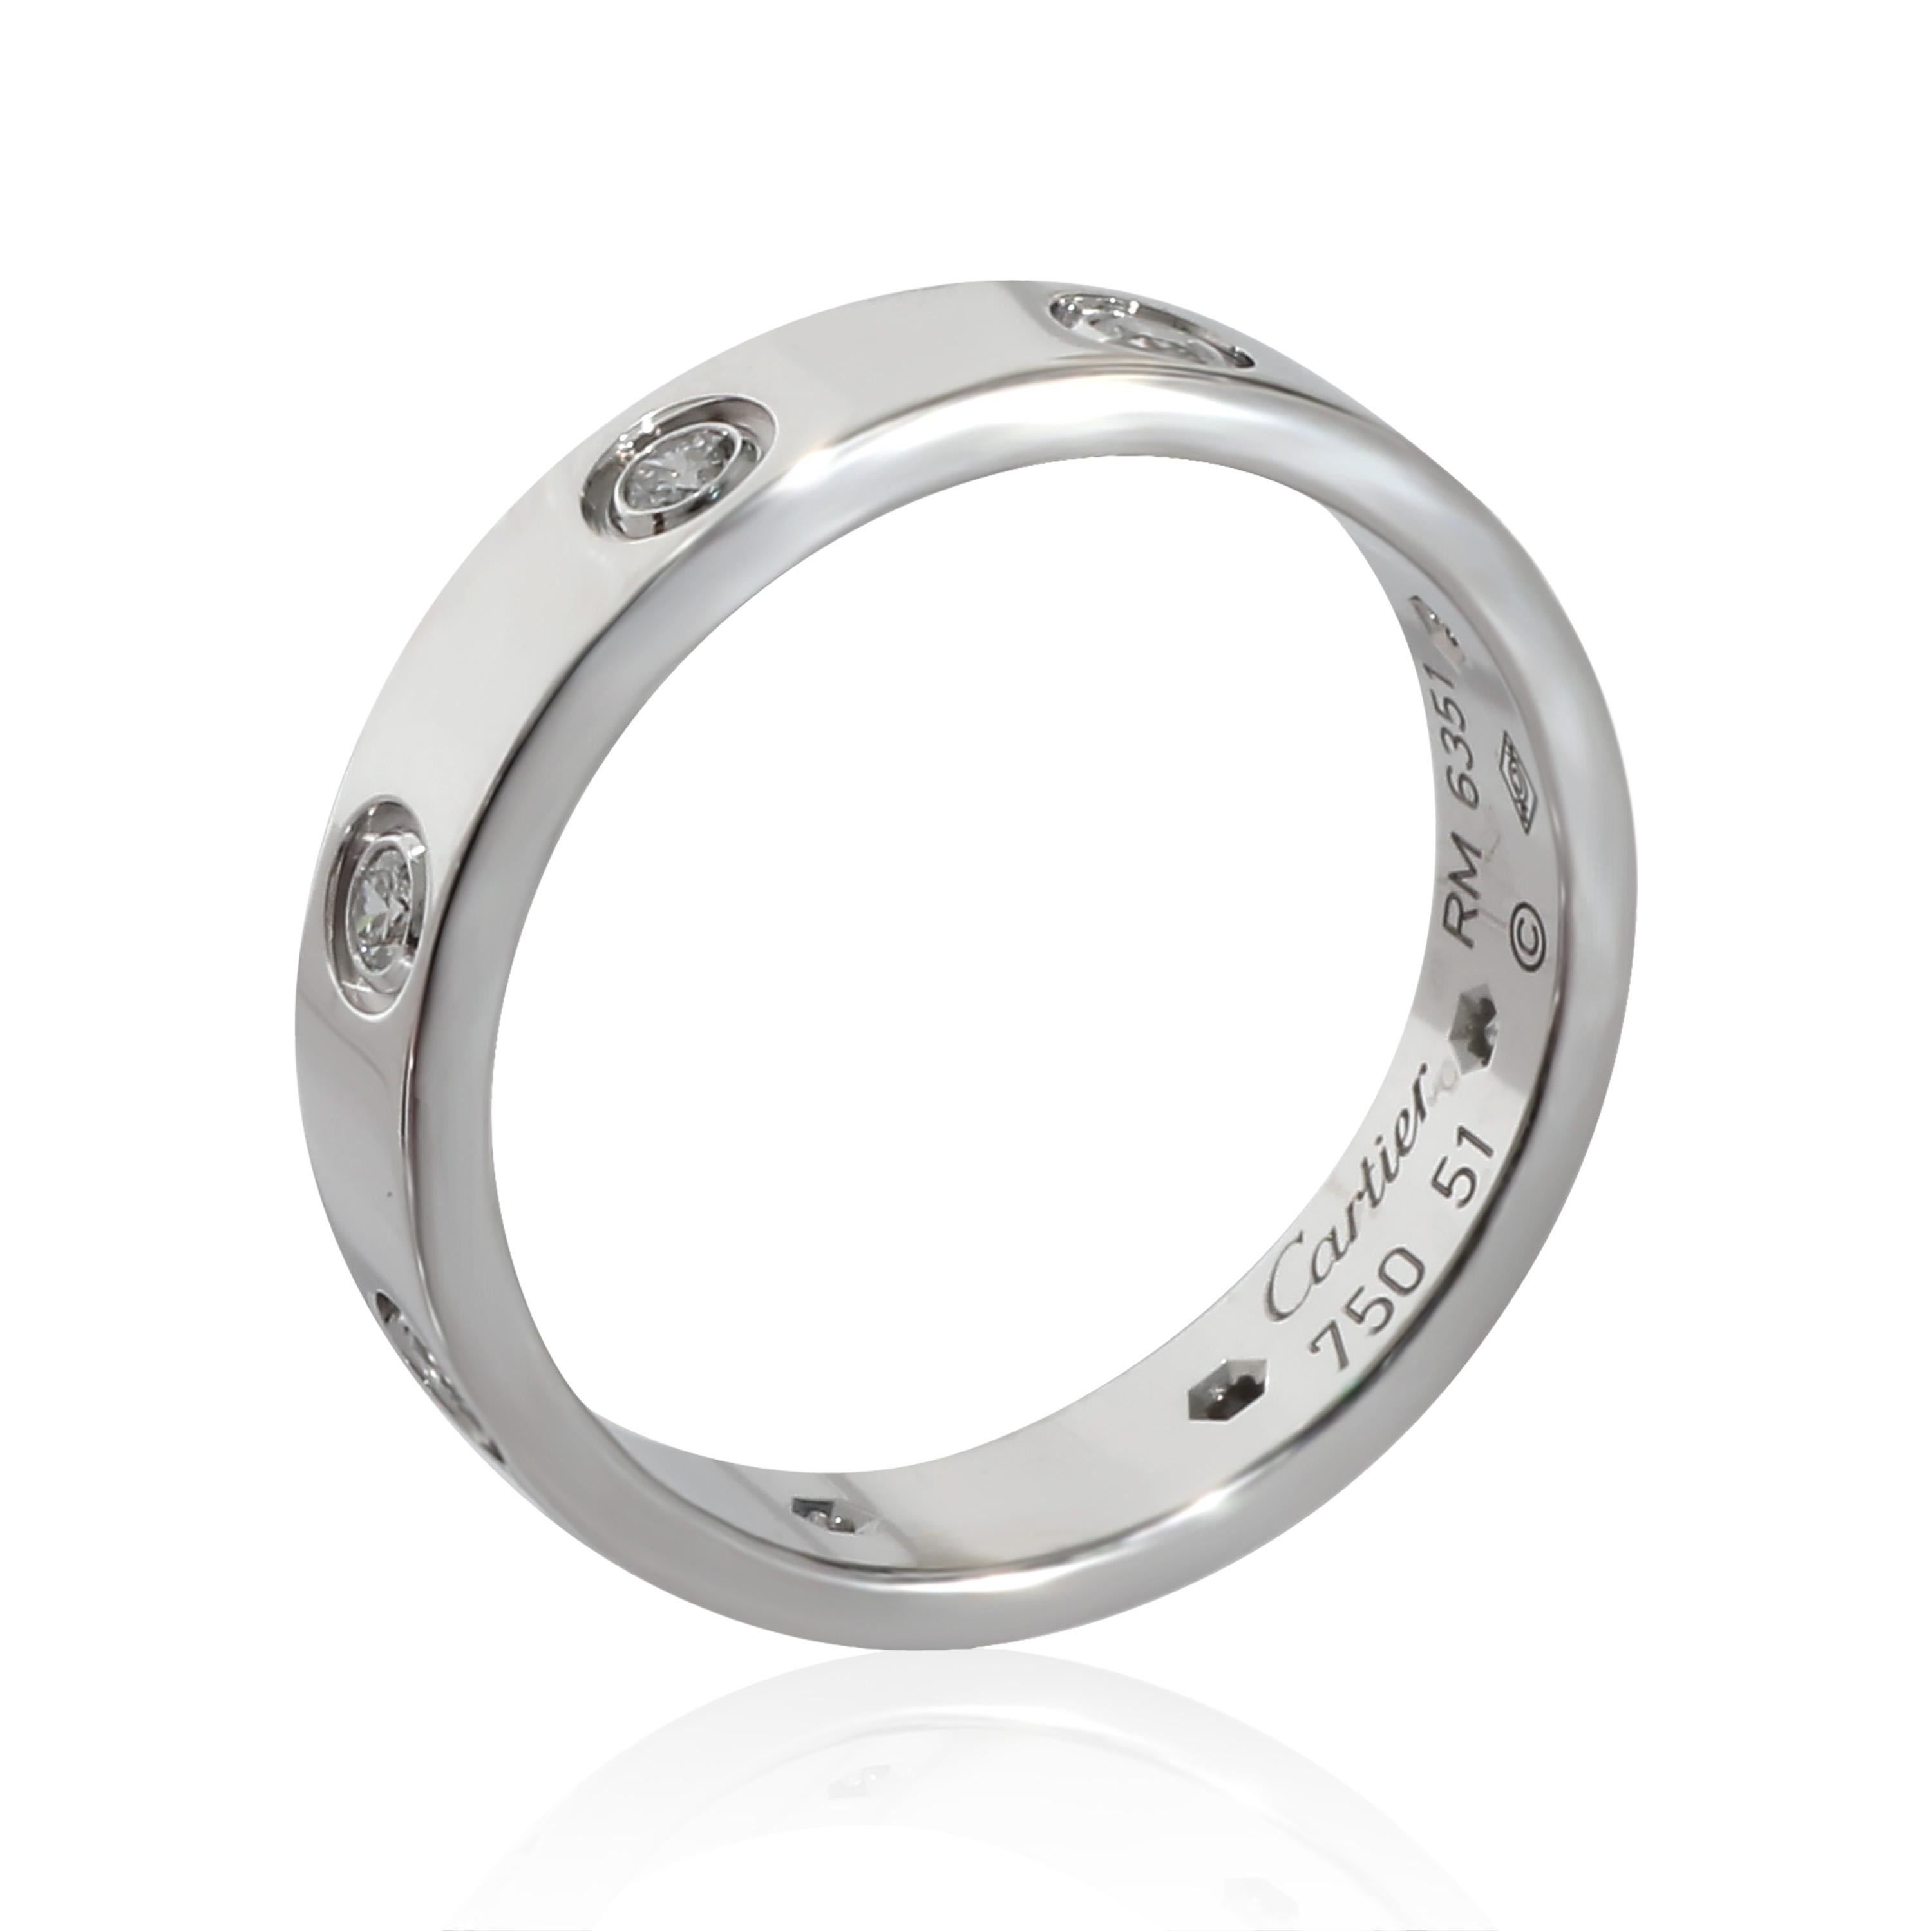 Cartier Love Diamond Wedding Band in 18KT White Gold 0.19 CTW In Excellent Condition For Sale In New York, NY